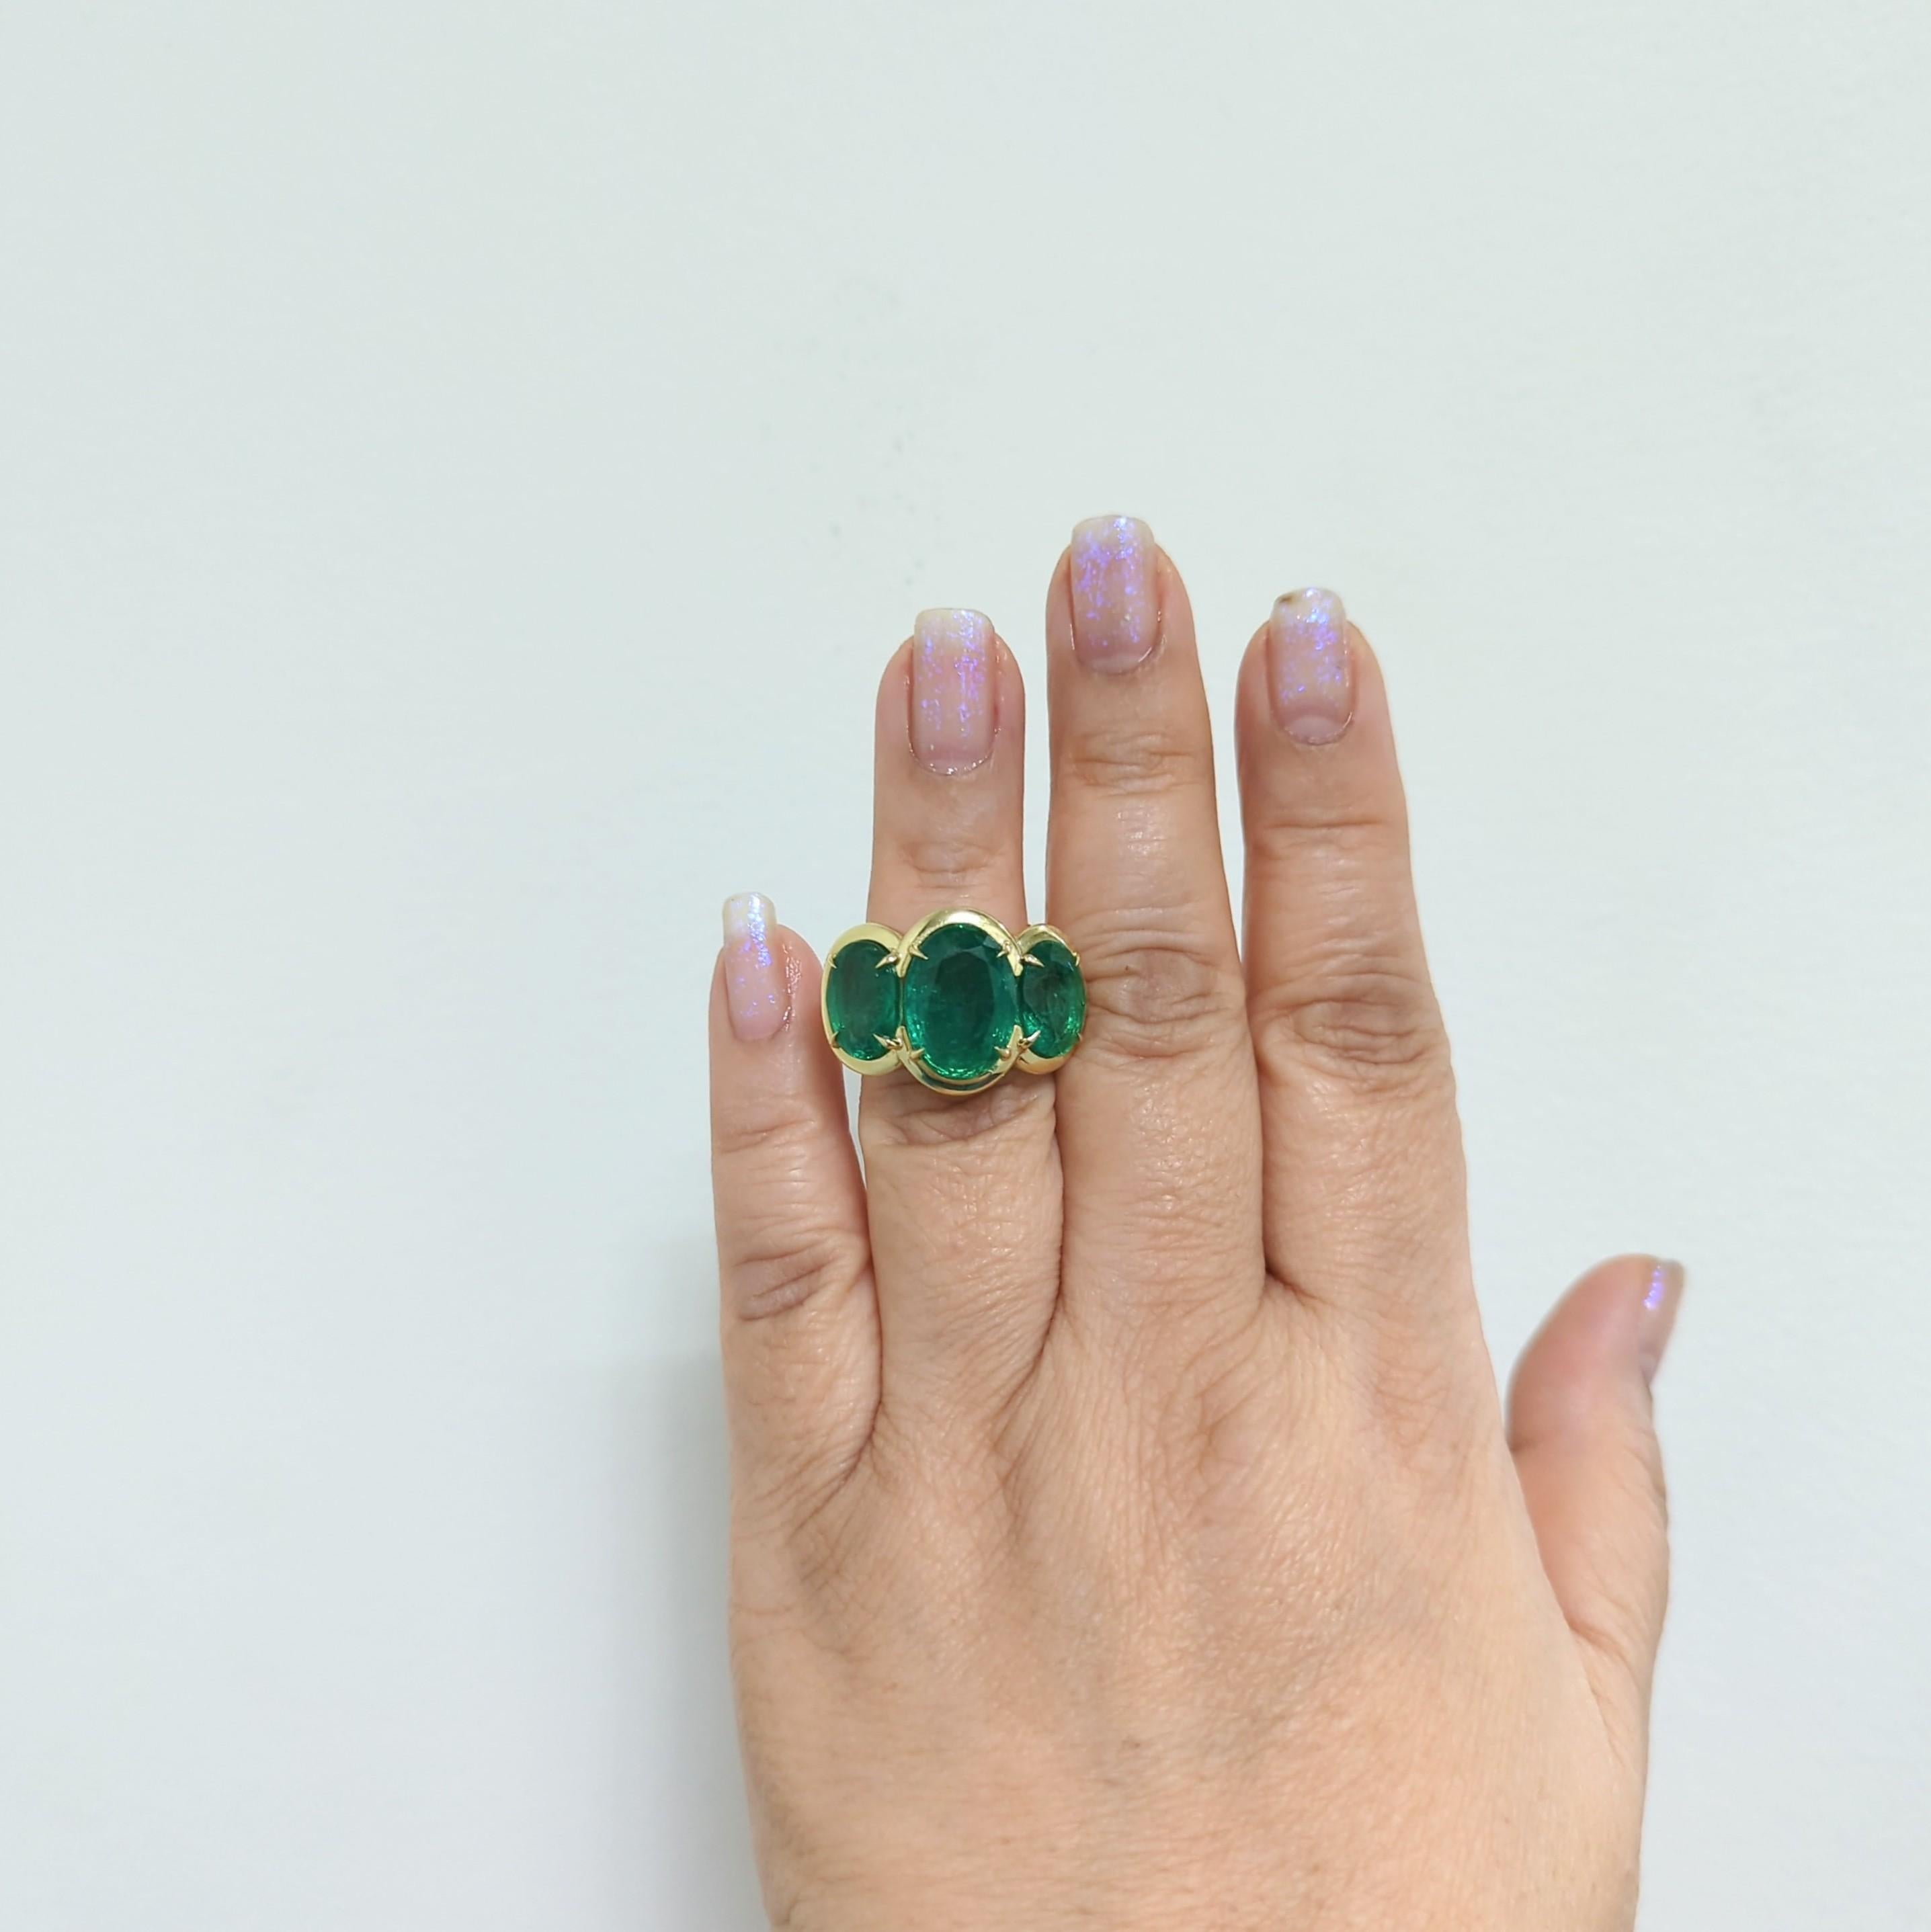 Gorgeous 15.18 ct. emerald ovals in a handmade 18k yellow gold mounting.  Ring size 6.5.